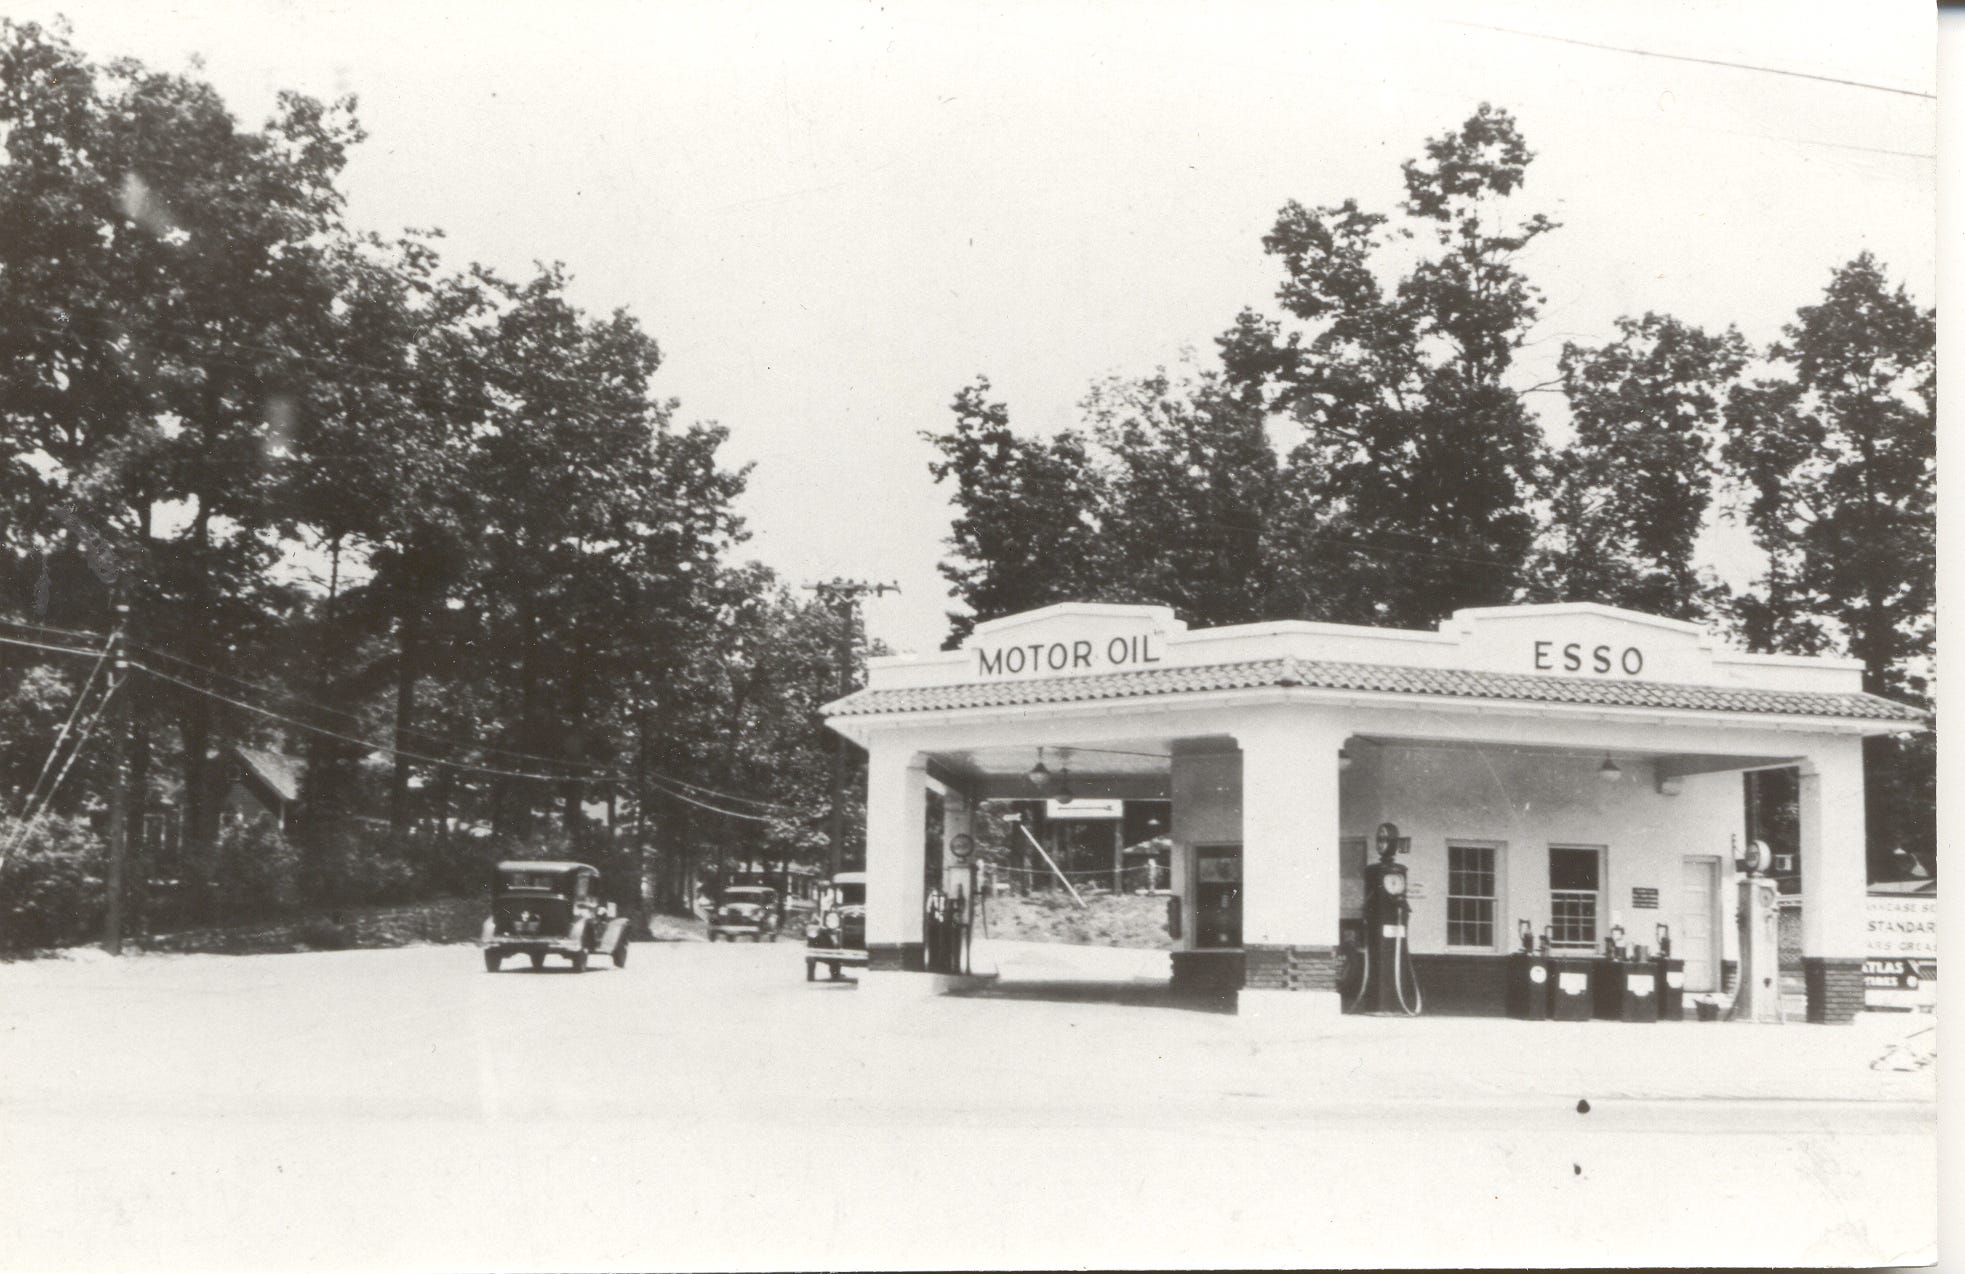 Melvin Lance's Esso Station was situated in Black Mountain at the junction of State Street and Montreat Road, where Town Square is currently located.